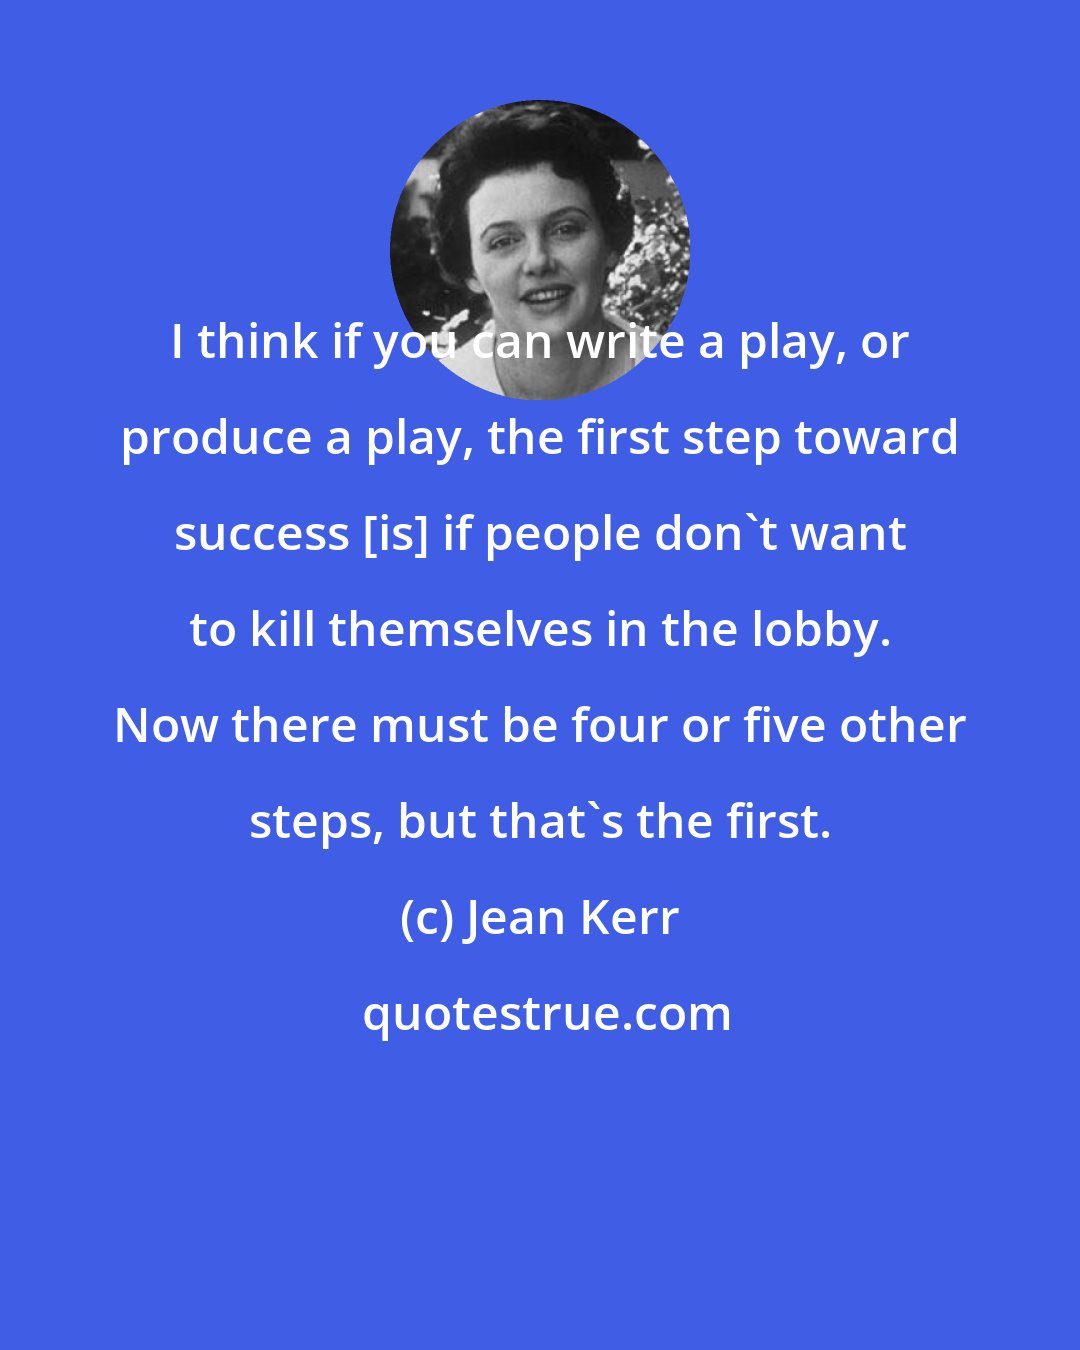 Jean Kerr: I think if you can write a play, or produce a play, the first step toward success [is] if people don't want to kill themselves in the lobby. Now there must be four or five other steps, but that's the first.